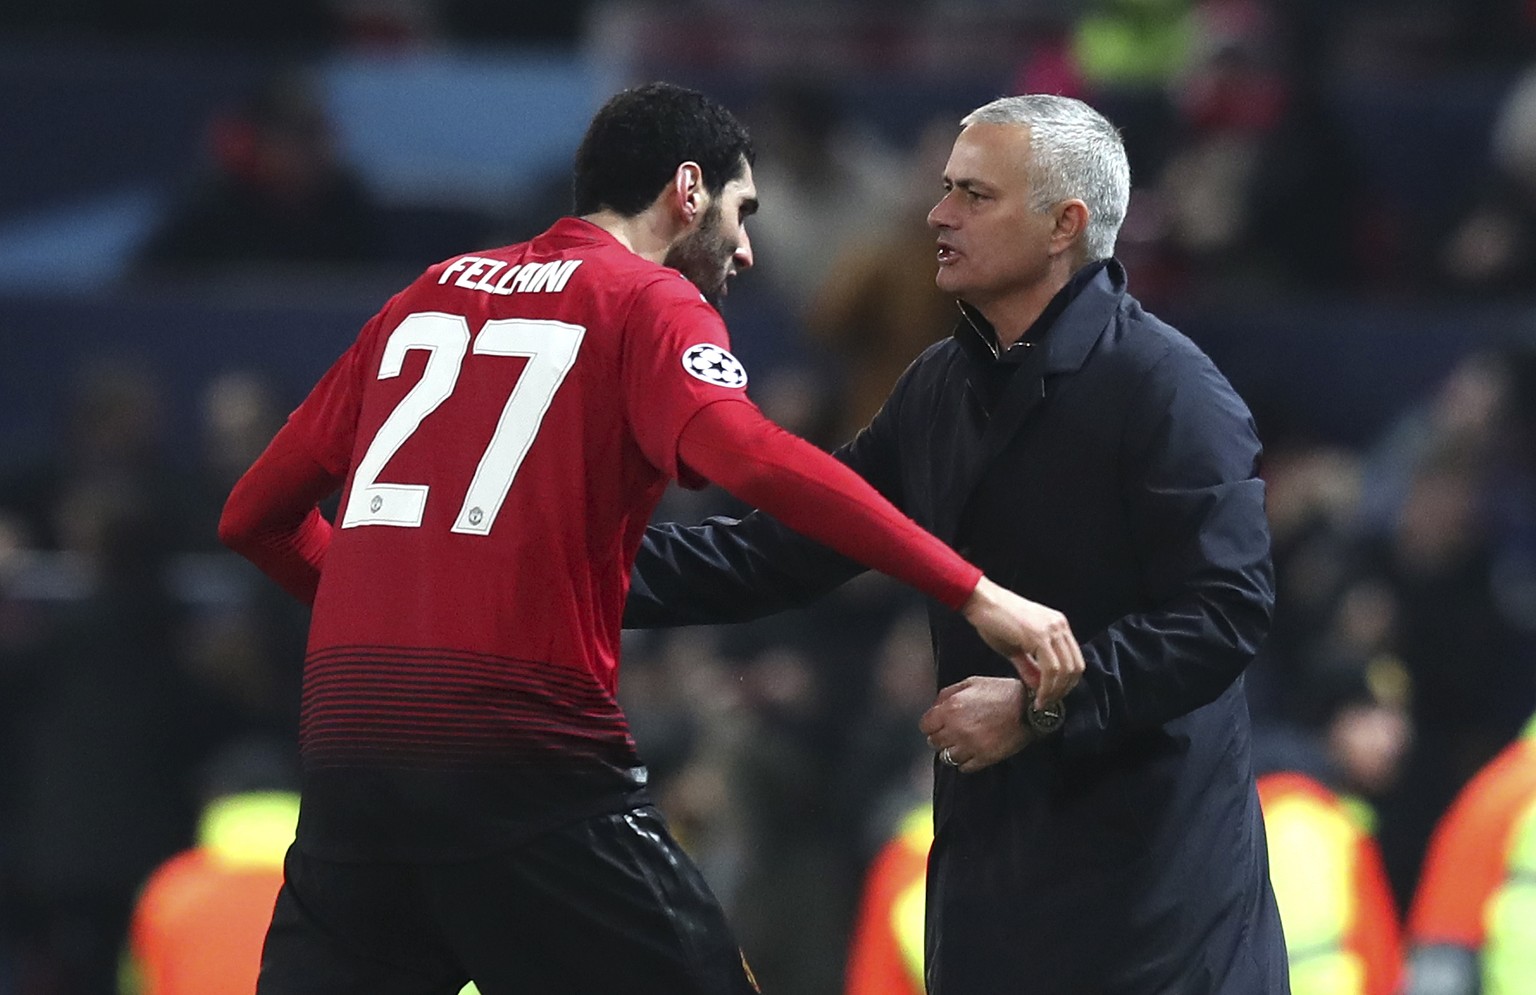 ManU midfielder Marouane Fellaini celebrates with ManU coach Jose Mourinho after scoring the opening goal during the Champions League group H soccer match between Manchester United and Young Boys at O ...